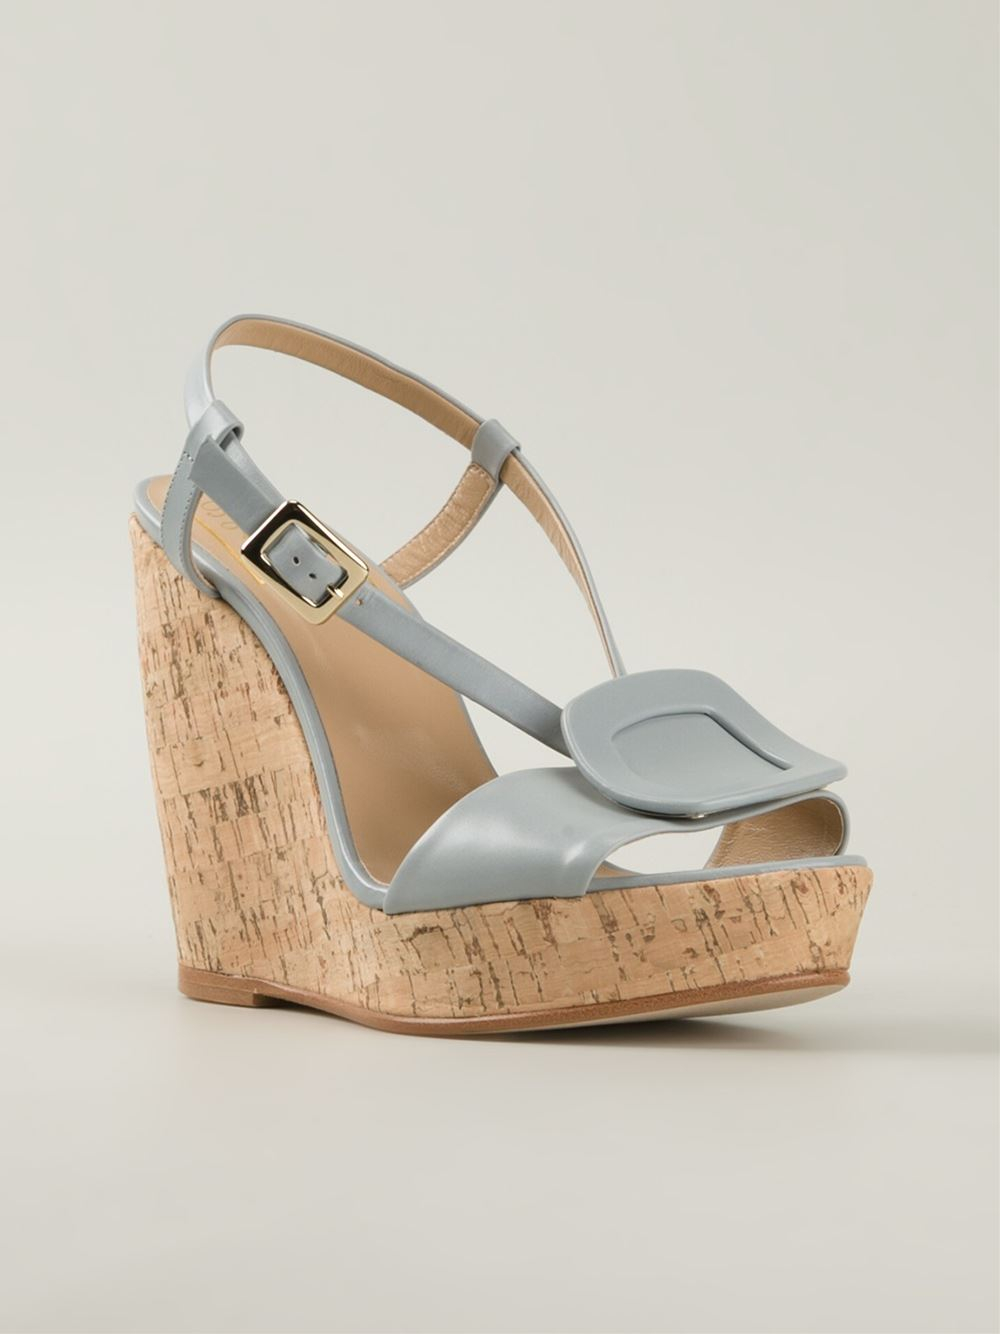 Roger Vivier Leather Wedge Sandals in Blue - Lyst